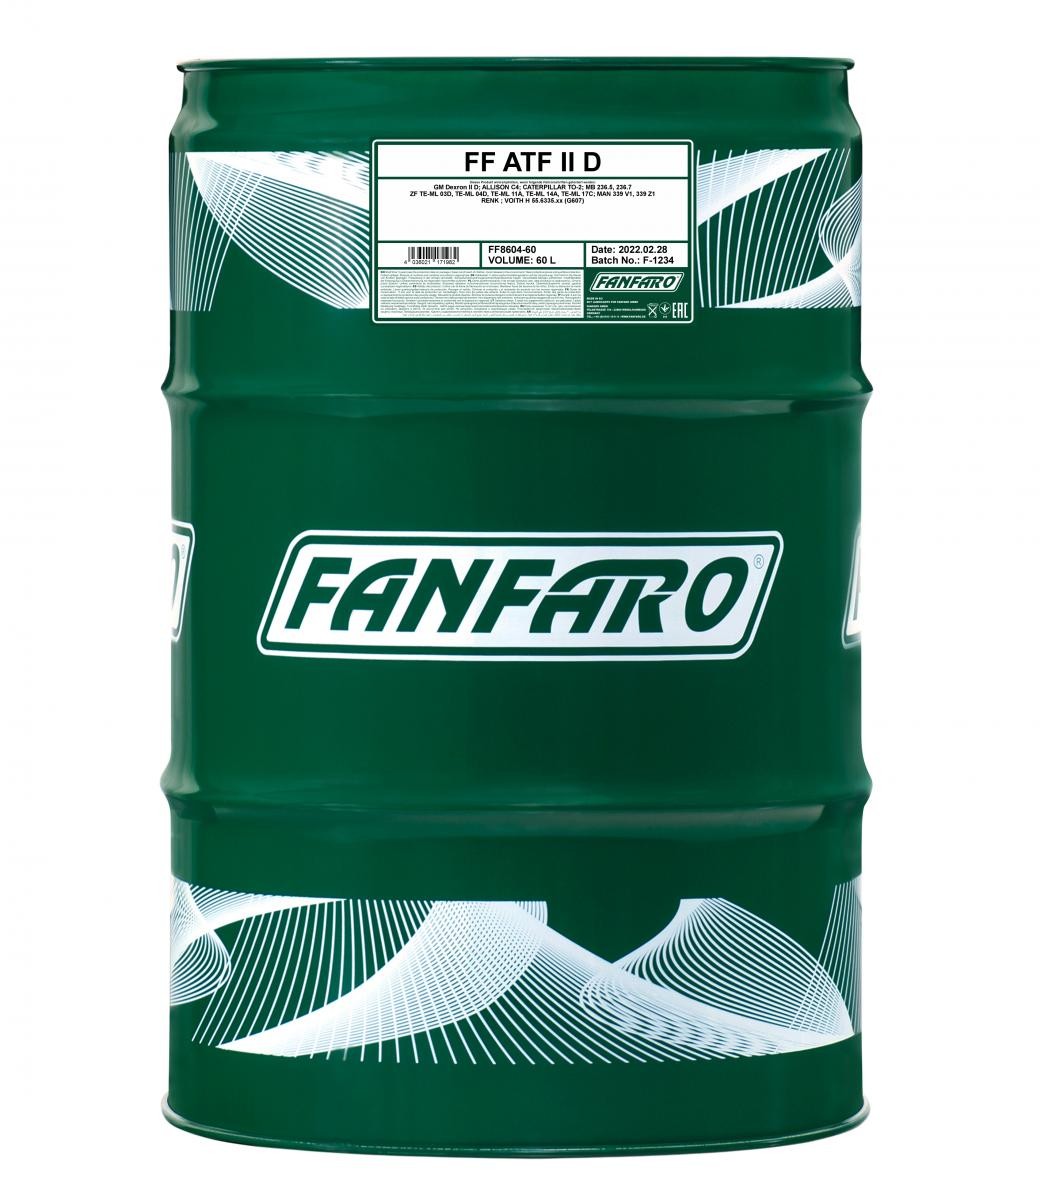 Great value for money - FANFARO Automatic transmission fluid FF8604-60